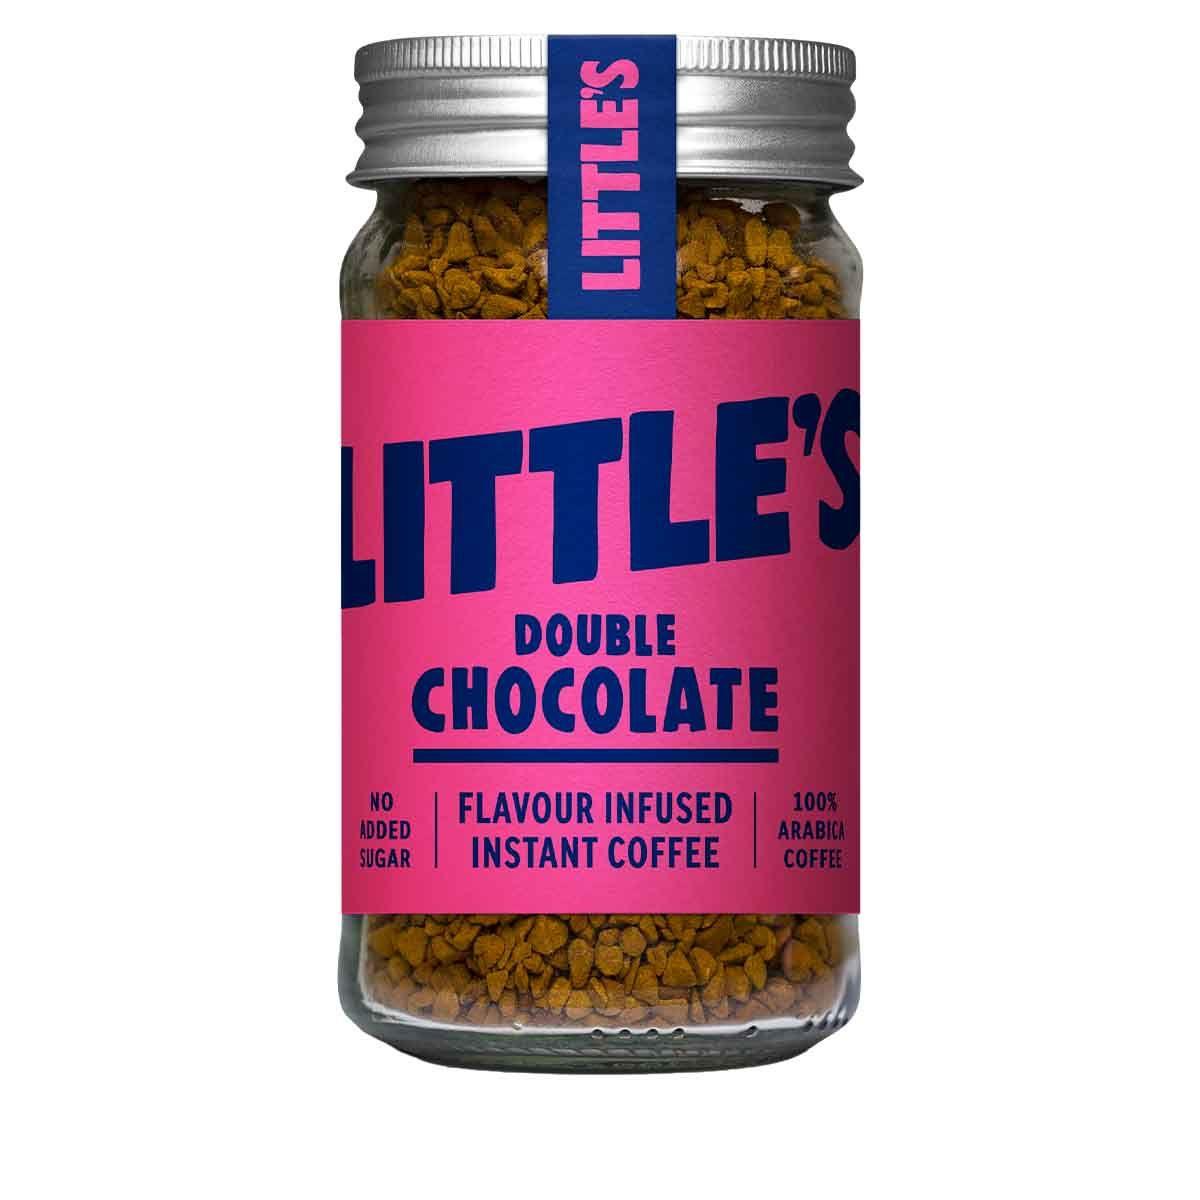 Littles - Flavoured Instant Coffee Double Chocolate - 50g - Vending Superstore